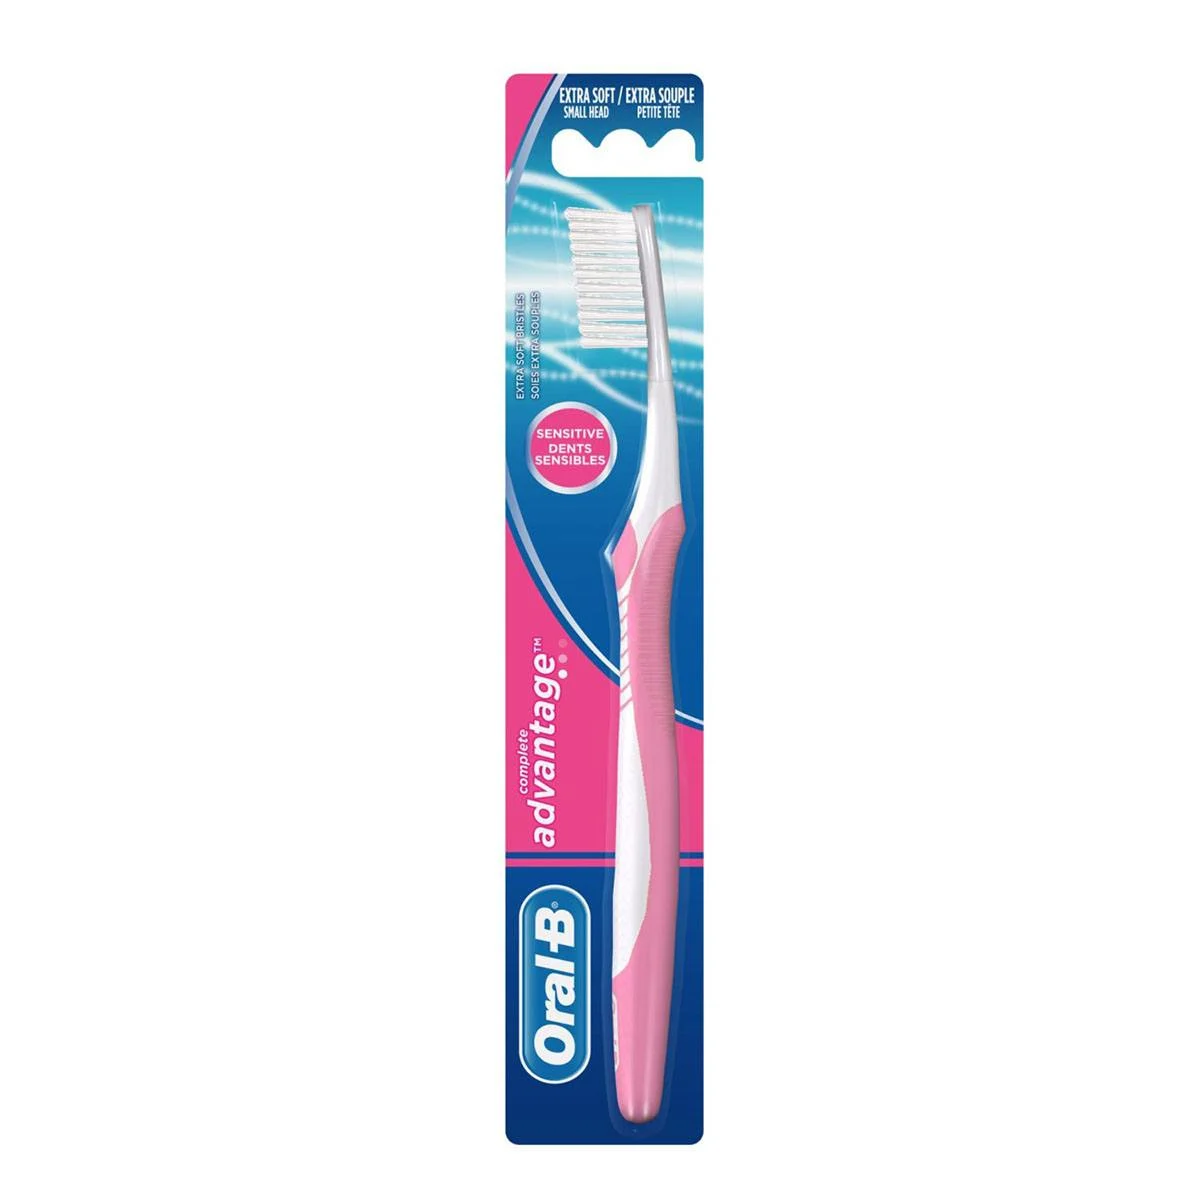 Oral-B Complete Advantage Sensitive Manual Toothbrush undefined